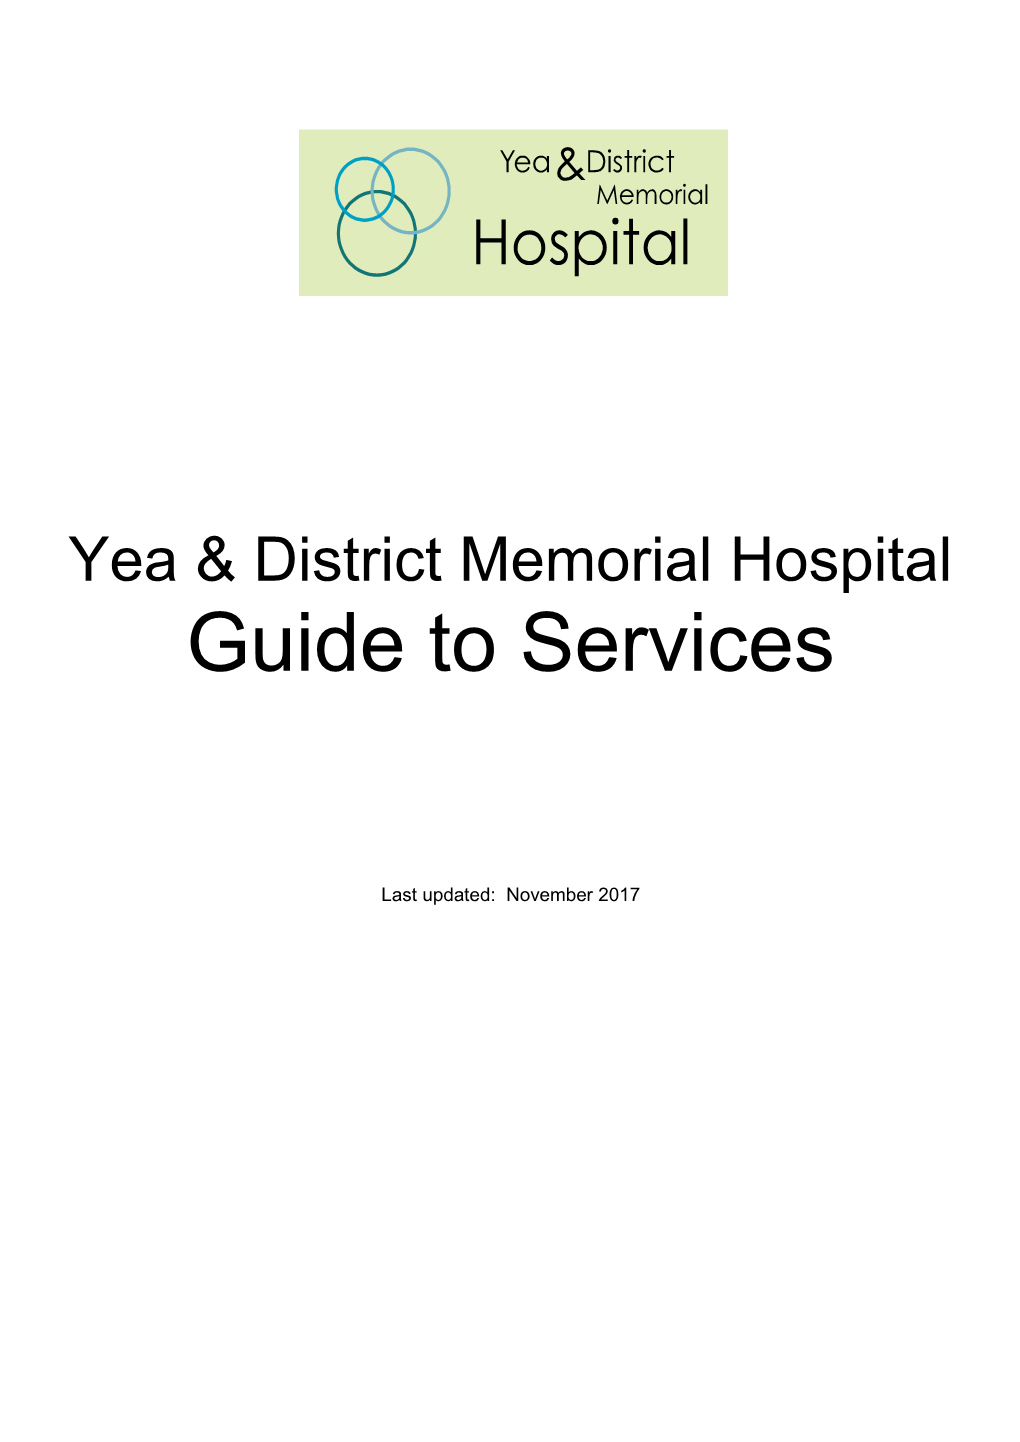 Guide to Services